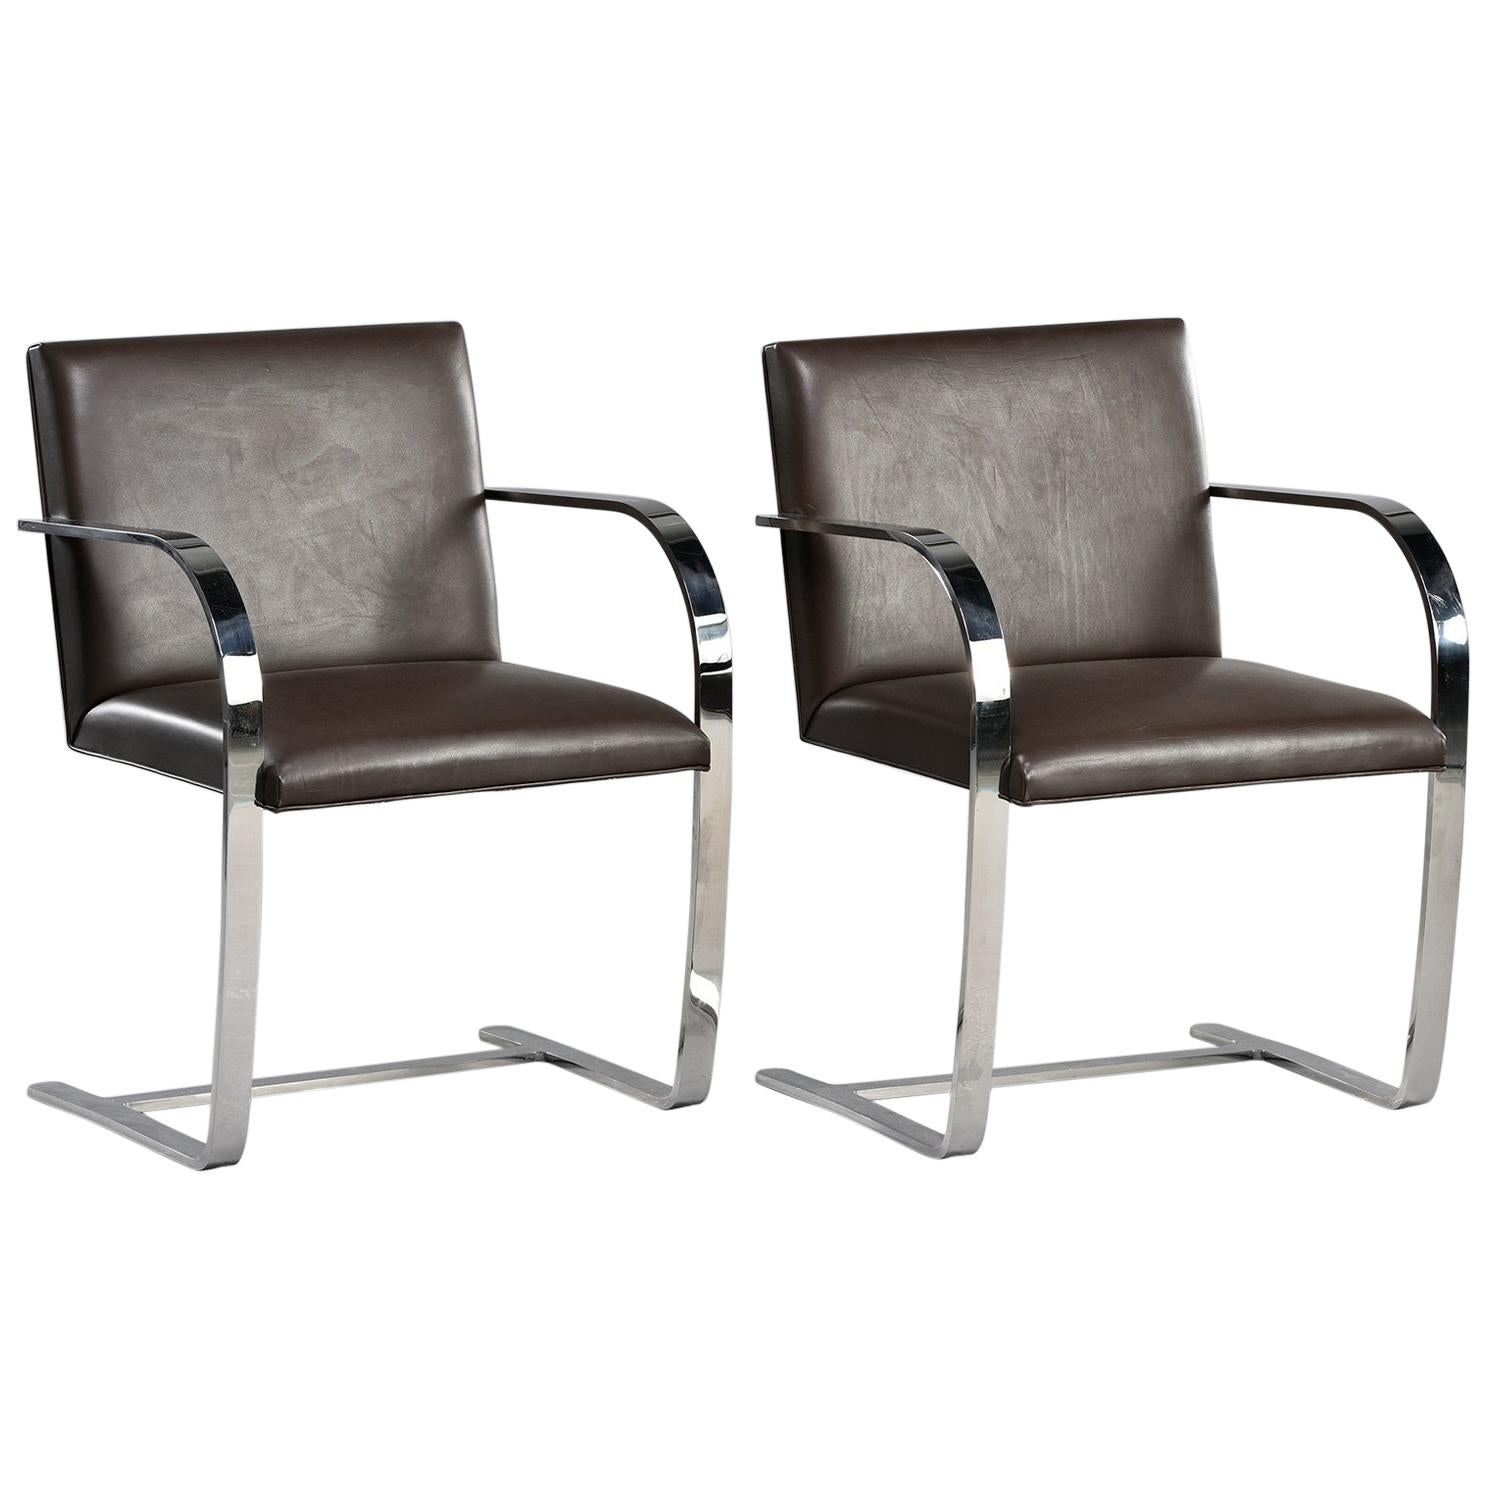 Pair of Knoll Bruno Flat Bar Chairs with Leather Upholstery